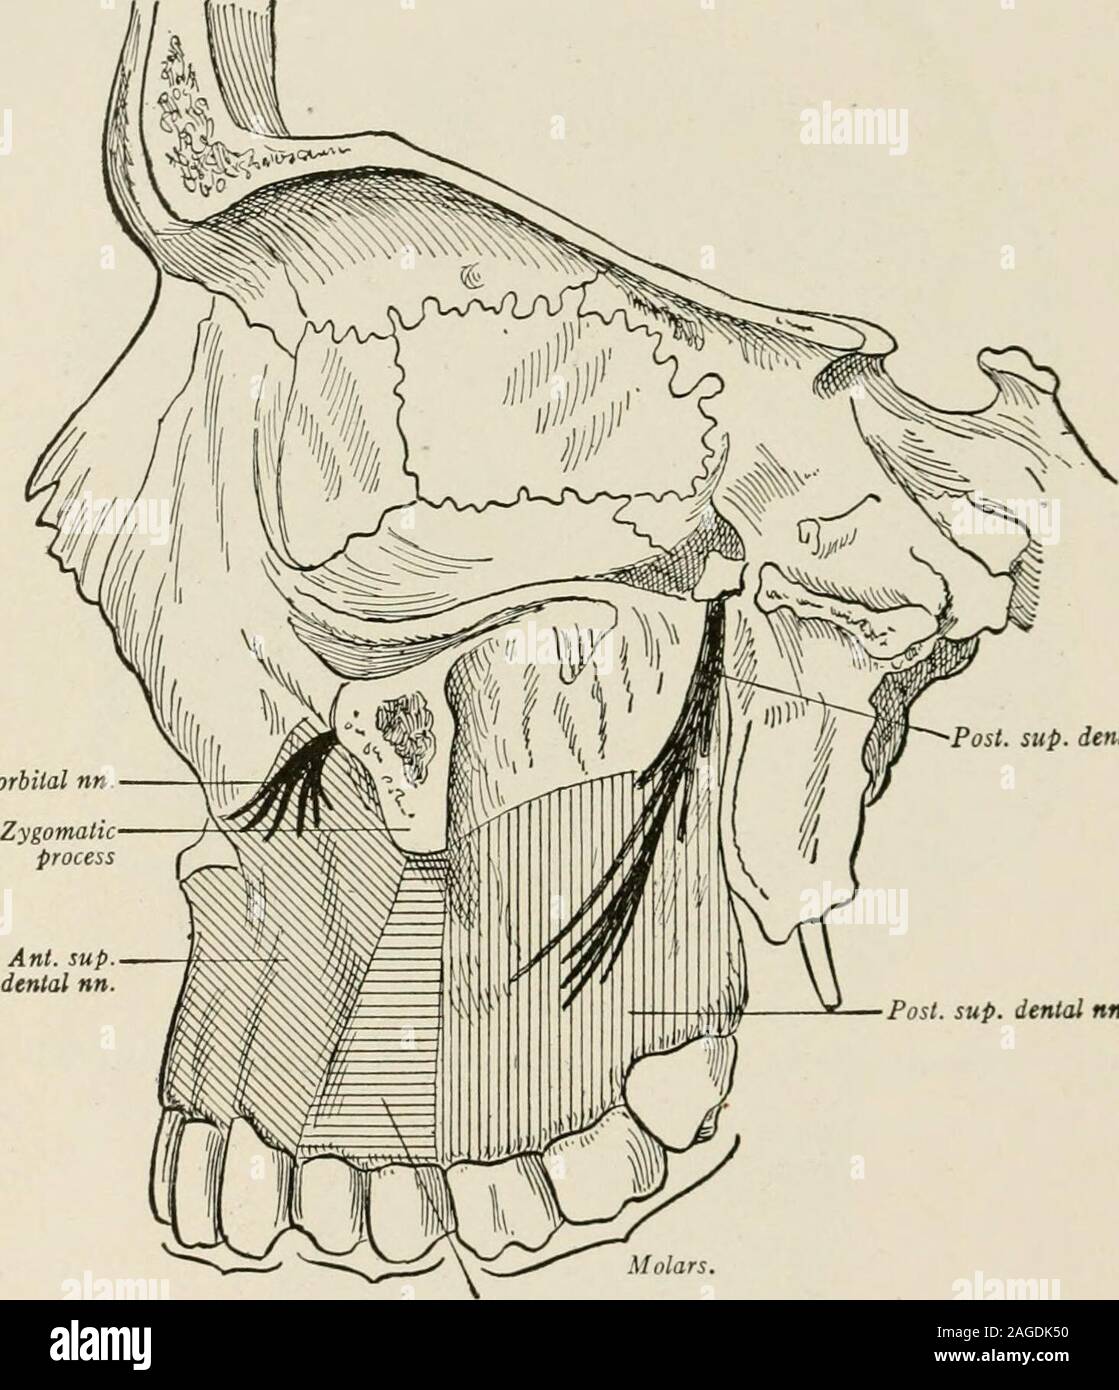 . Local and regional anesthesia; with chapters on spinal, epidural, paravertebral, and parasacral analgesia, and other applications of local and regional anesthesia to the surgery of the eye, ear, nose and throat, and to dental practice. Fig. 163.—Regional anesthesia by way of infra-orbital foramen. (After Fischer.) r^ i 1 I: Li- Fig. 164.— Resulting area of anesthesia after bin kint; both infra-orbital nerves at infra-foramen. (Braun.) of the fifth nerve are involved in the field of operation it is alwayspreferable to block the gasserian ganglion when possible, but for 534 LOCAL ANESTHESL^ va Stock Photo